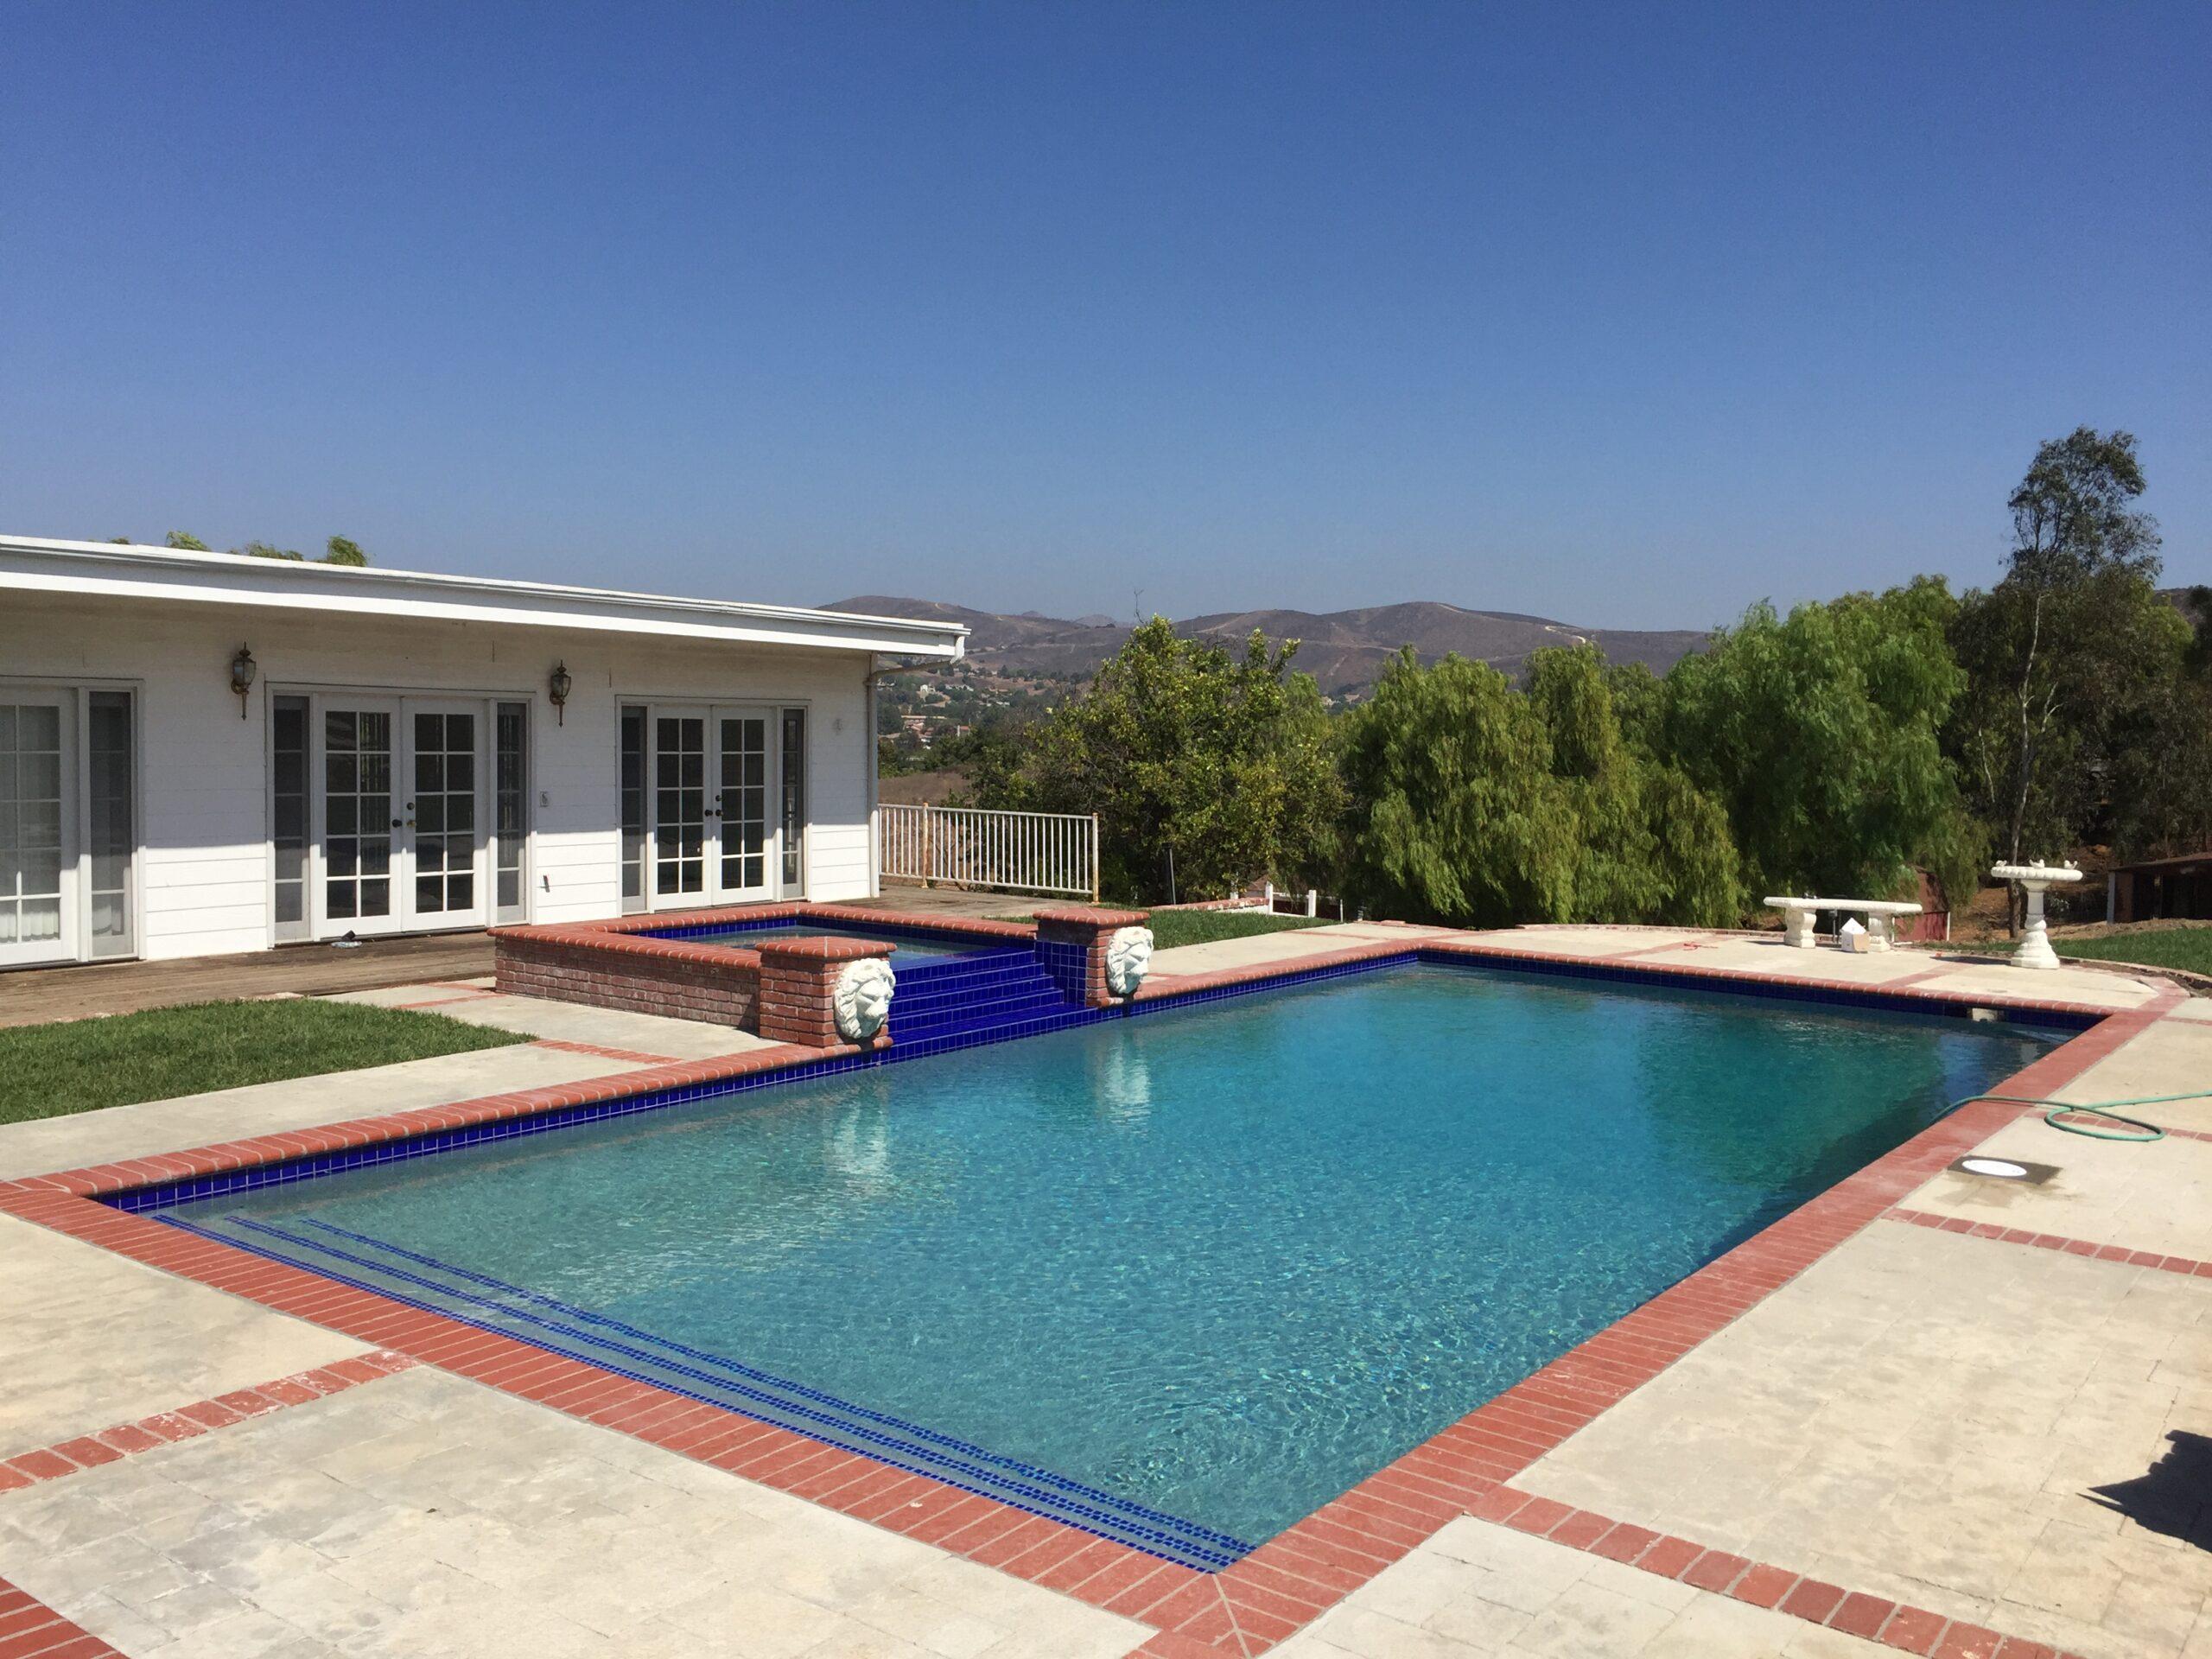 Pool Construction Services Experts In Orange CA